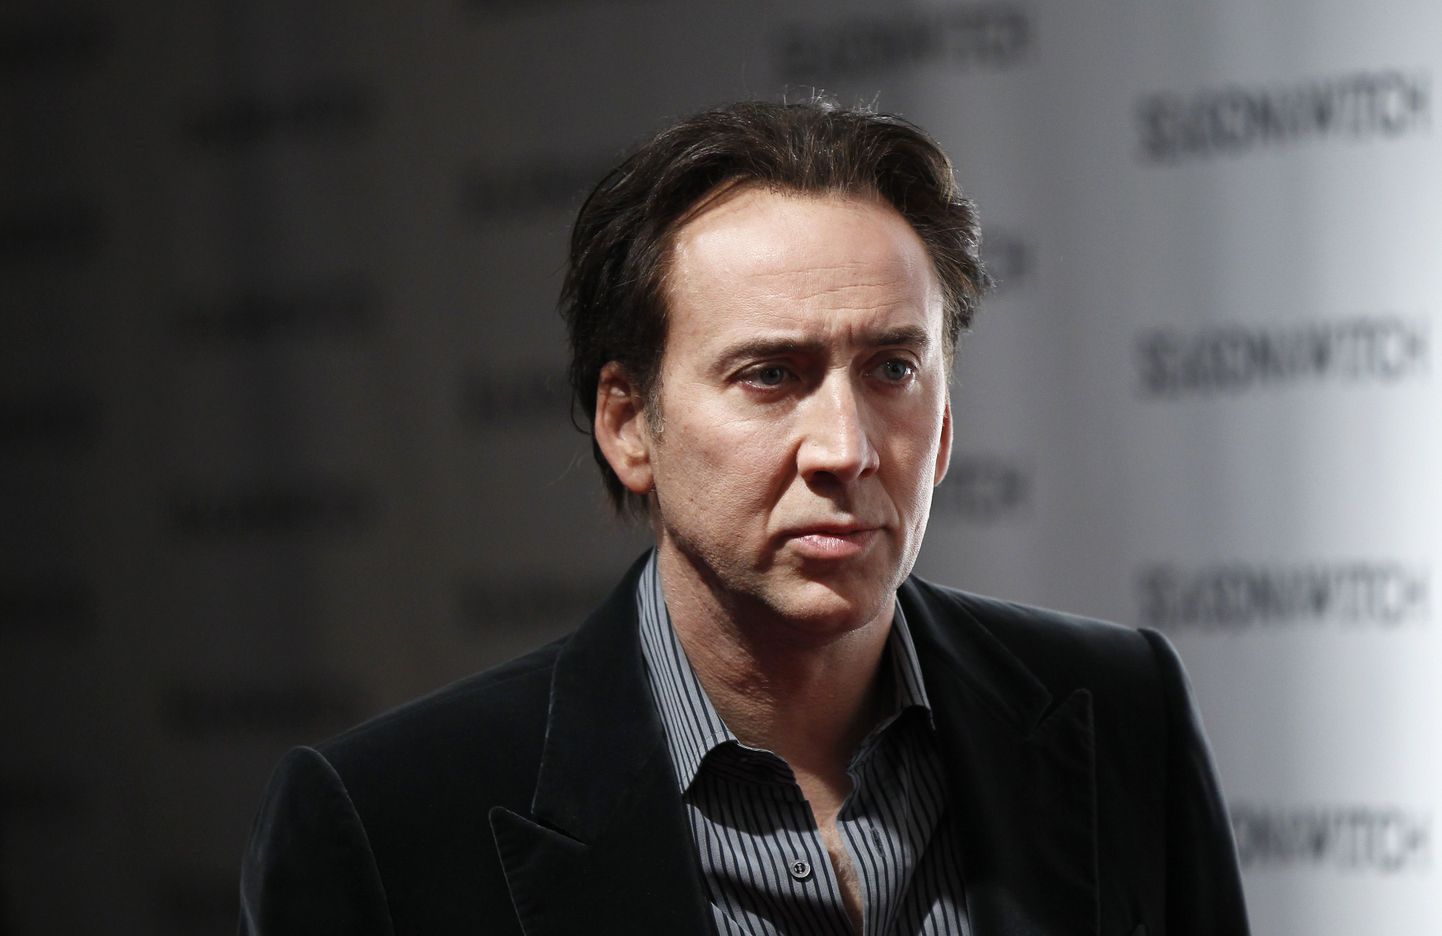 Cast member Nicolas Cage arrives for the premiere of the film "Season of the Witch" in New York January 4, 2011.  REUTERS/Lucas Jackson (UNITED STATES - Tags: ENTERTAINMENT)